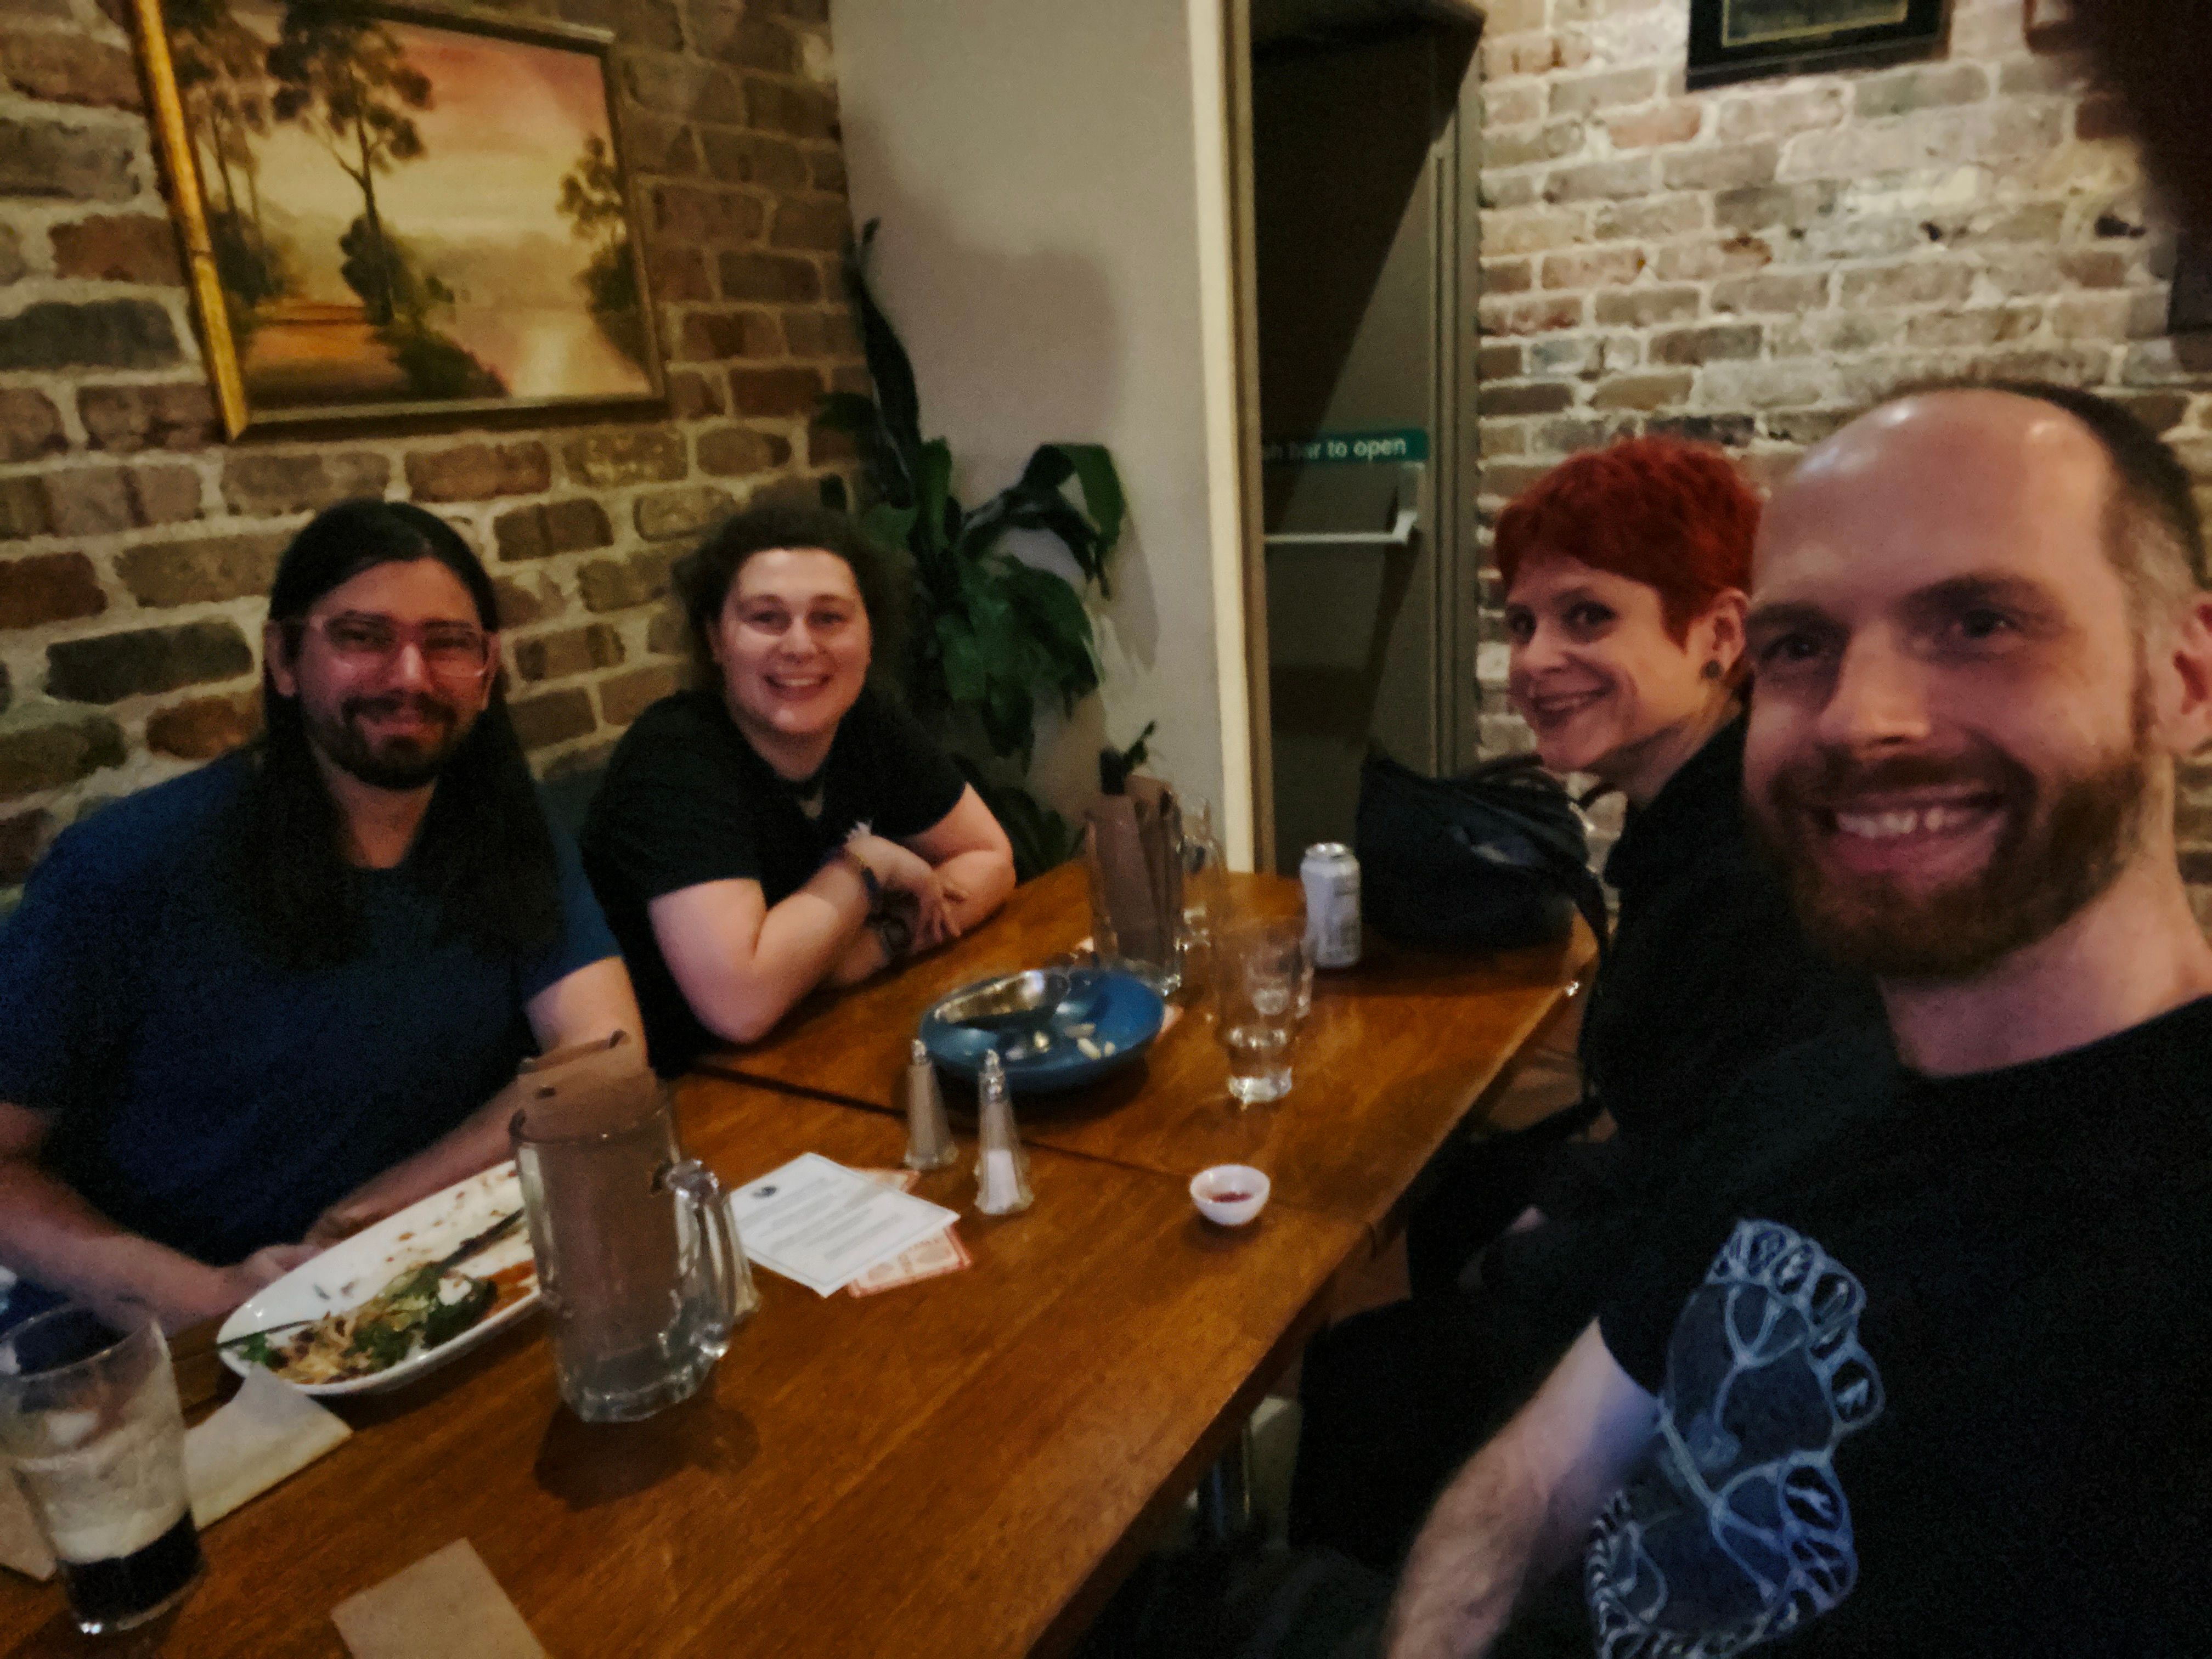 A selfie of four people sitting around a restaurant table smiling at the camera. Shlee has long dark hair and a beard, s0 has long curly hair pulled back into a bun, yayKM has short bright red hair, and I have short brown hair and a red beard.